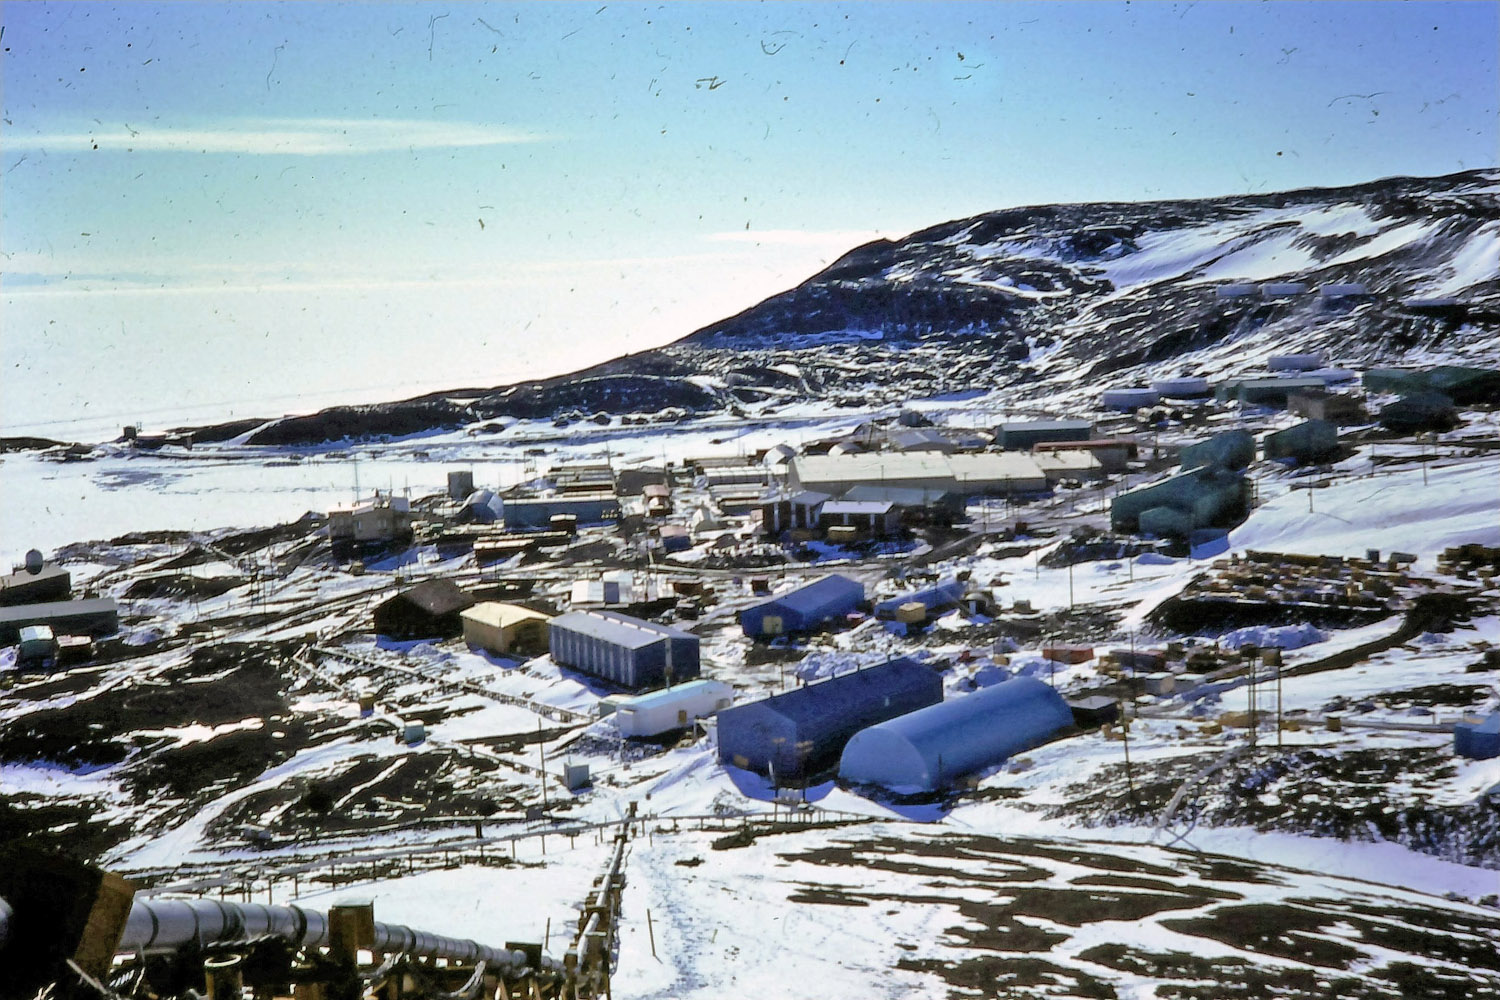 McMurdo Station at midnight, from the slopes of Observation Peak